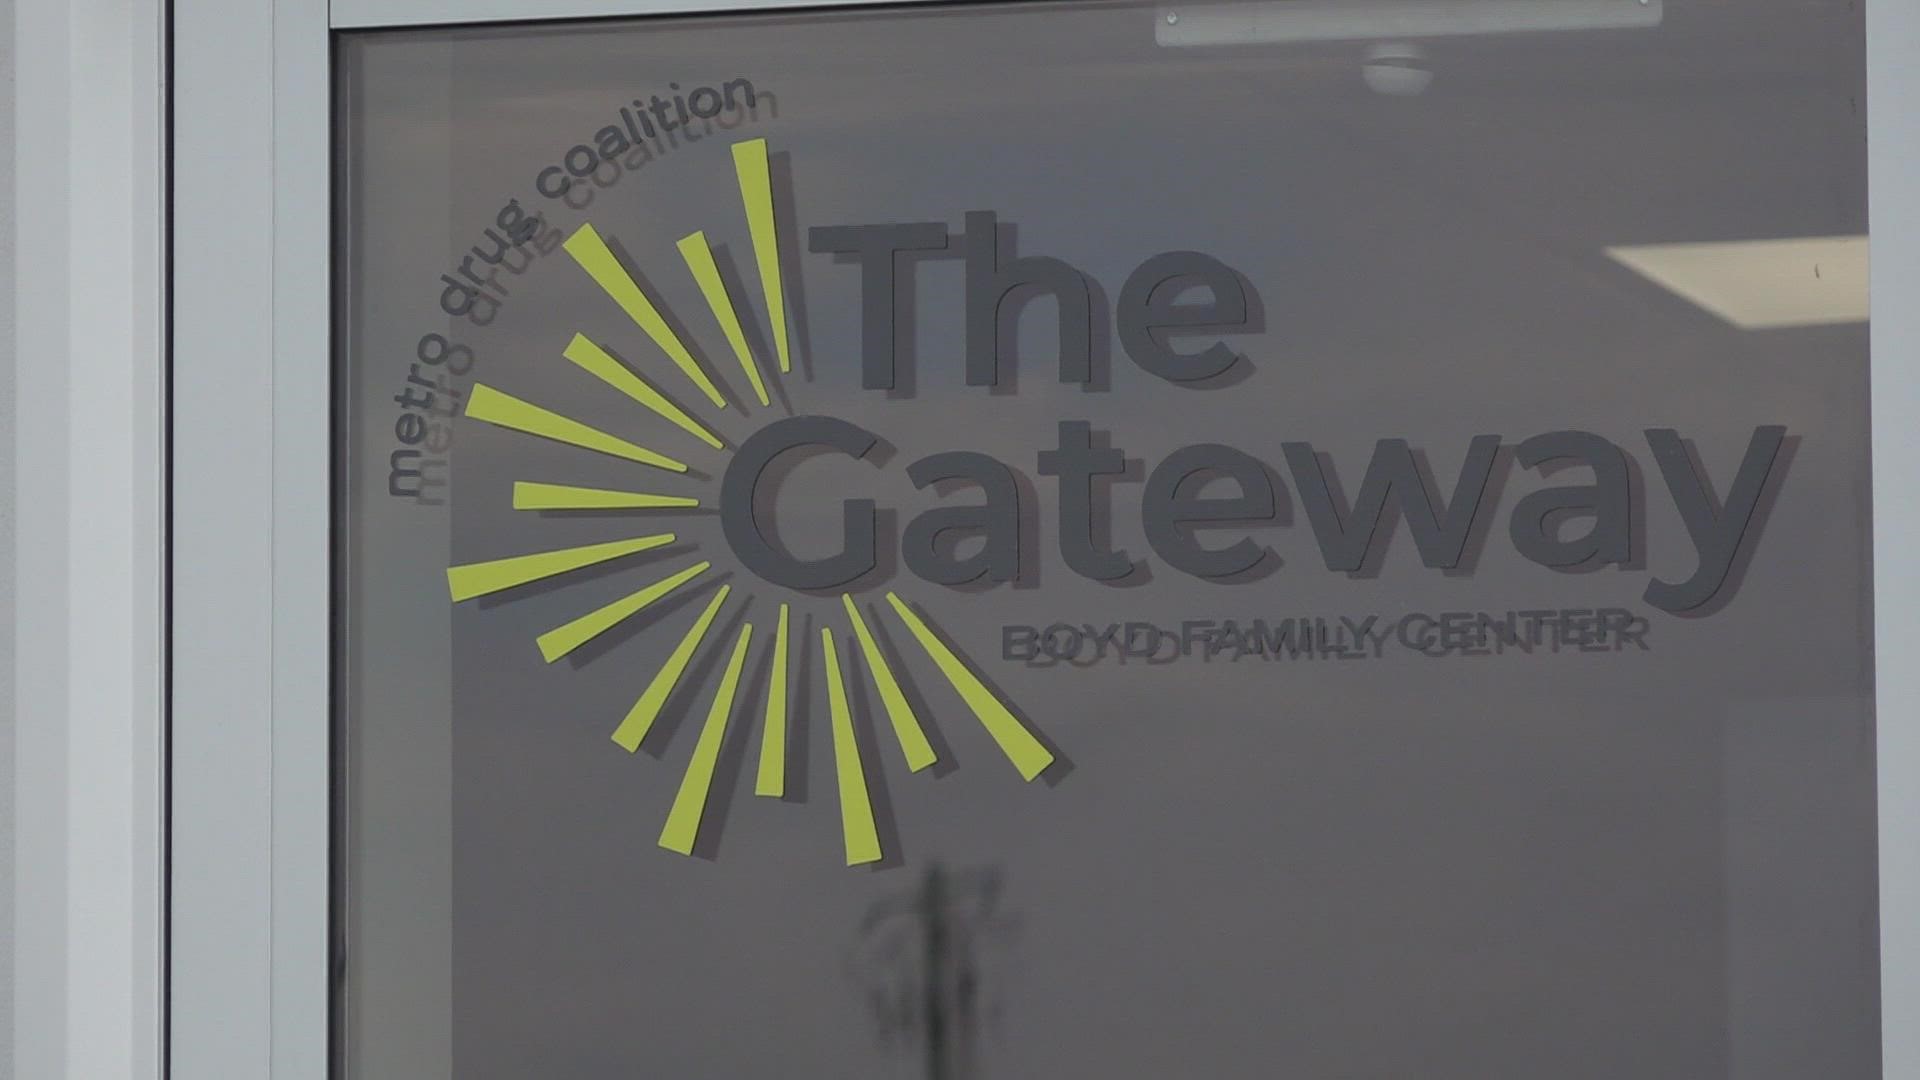 The Gateway is a centralized hub for recovery support. Community leaders hope it will make a difference in the fight against addiction.